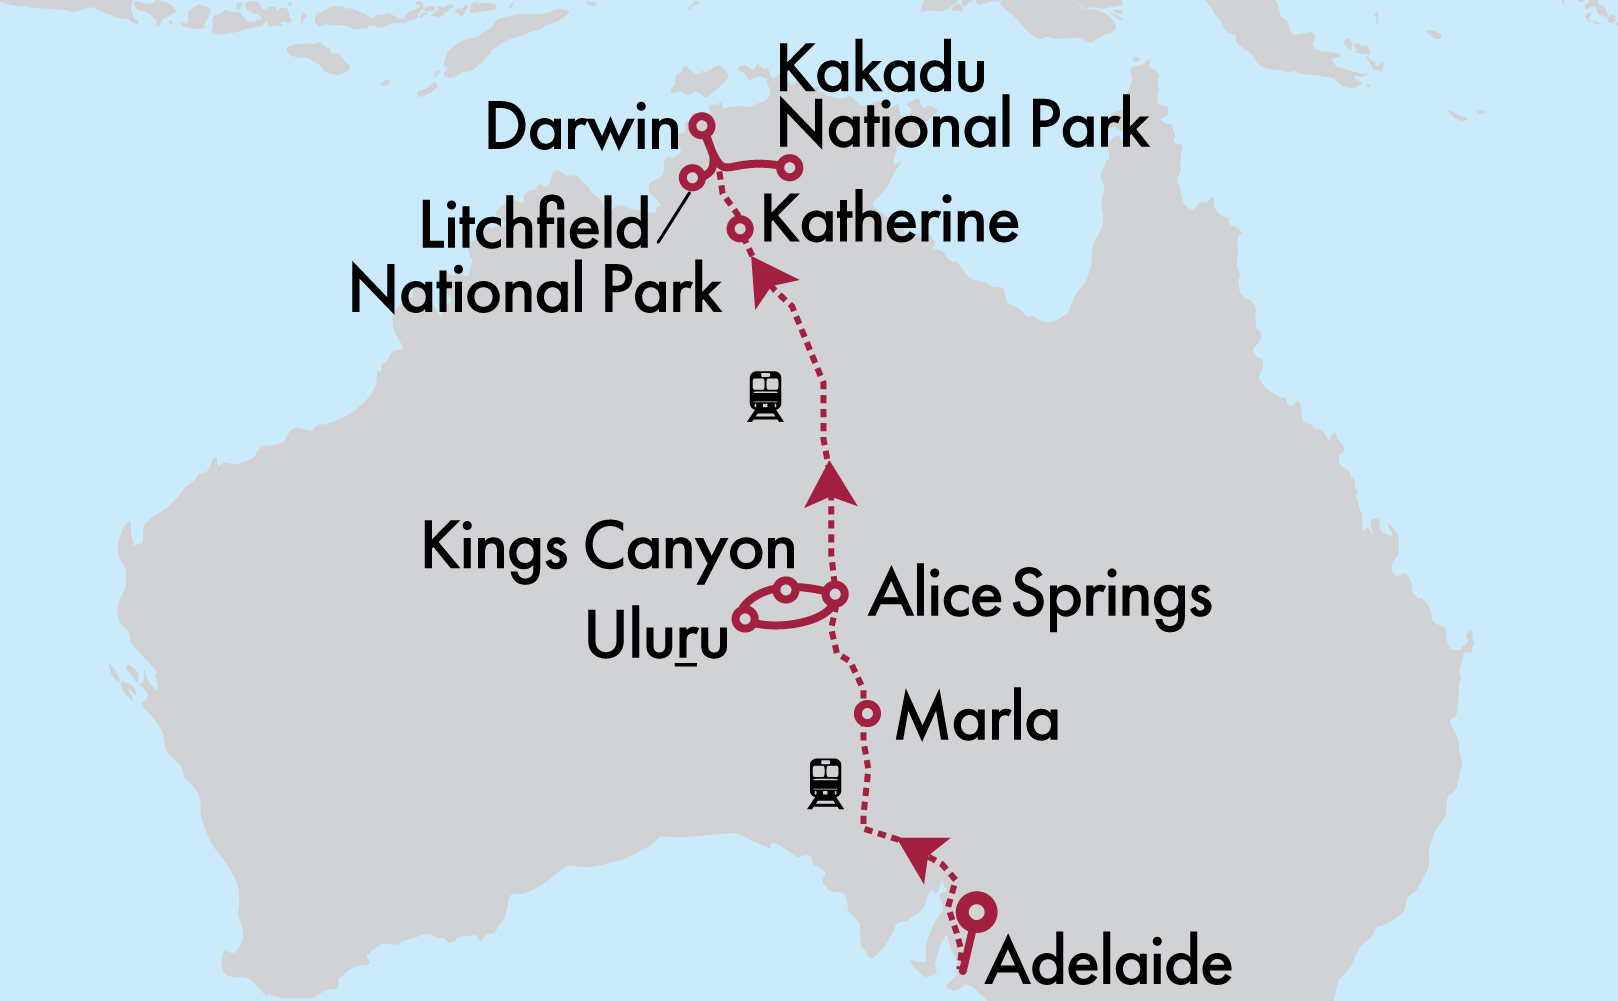 The Ultimate Territory Tour Holidays of Australia & the World Great